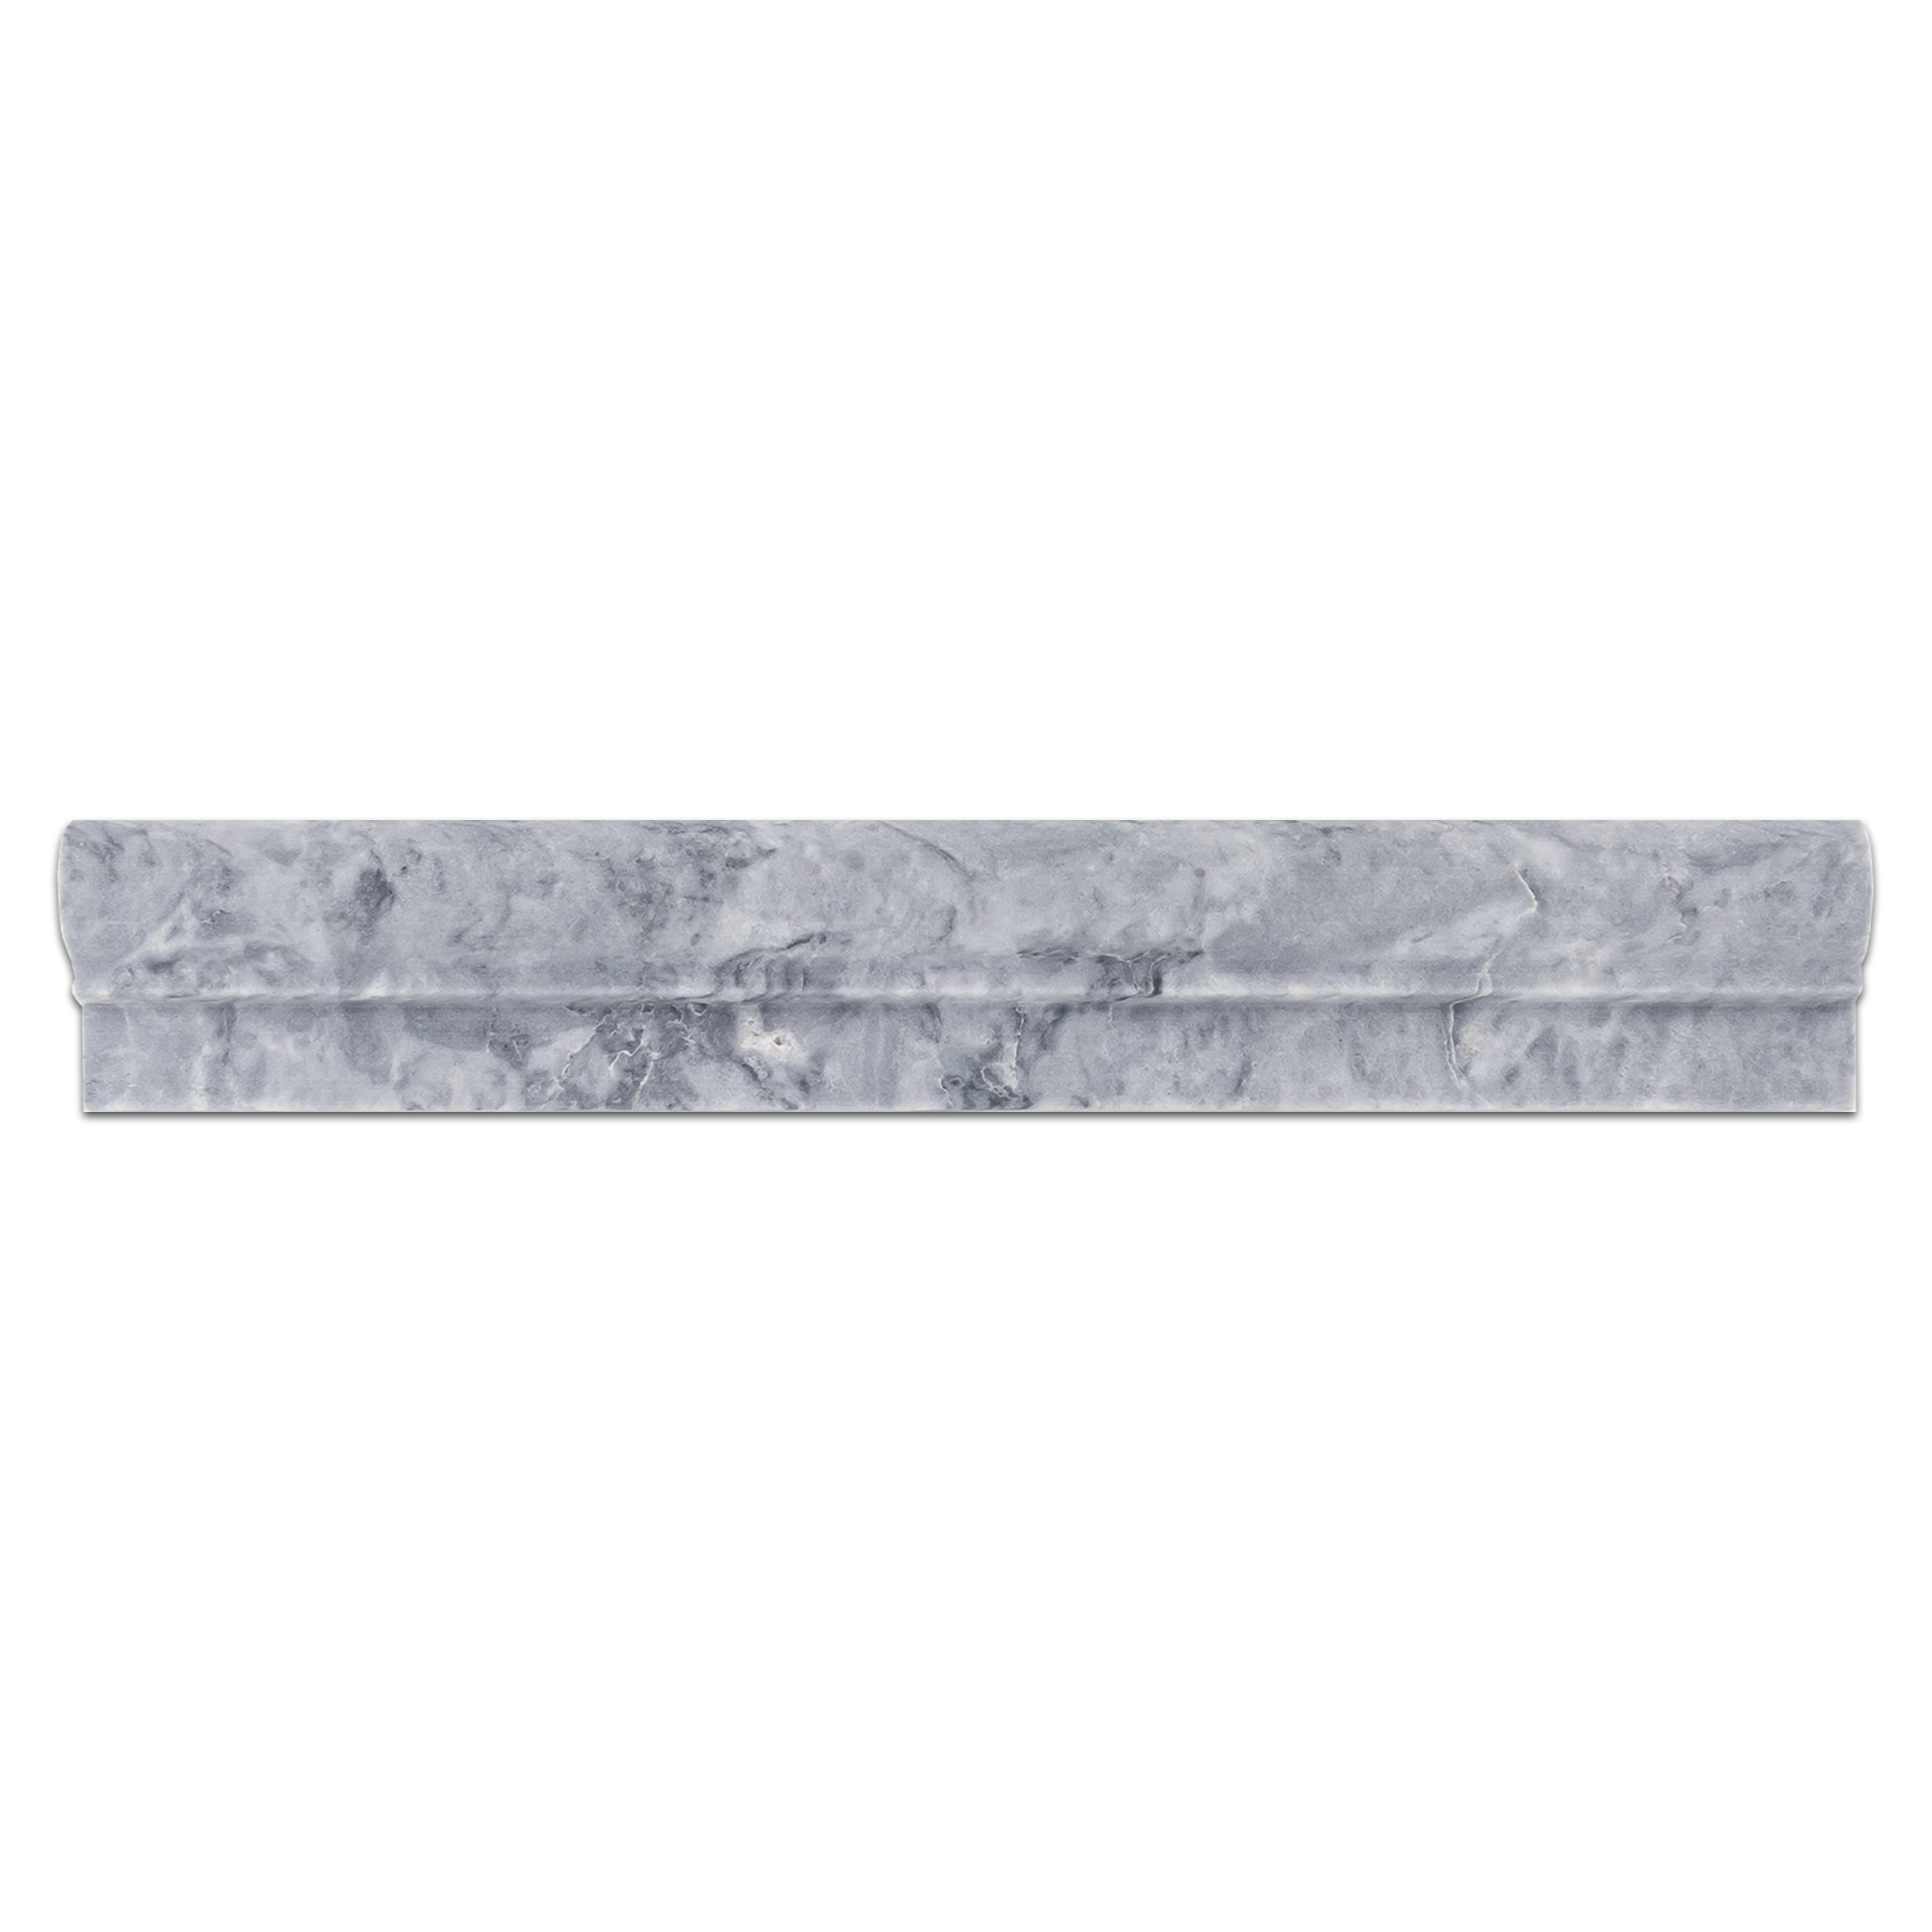 Elon Pacific Gray Marble Ogee 2x12 Polished Tile - Surface Group International